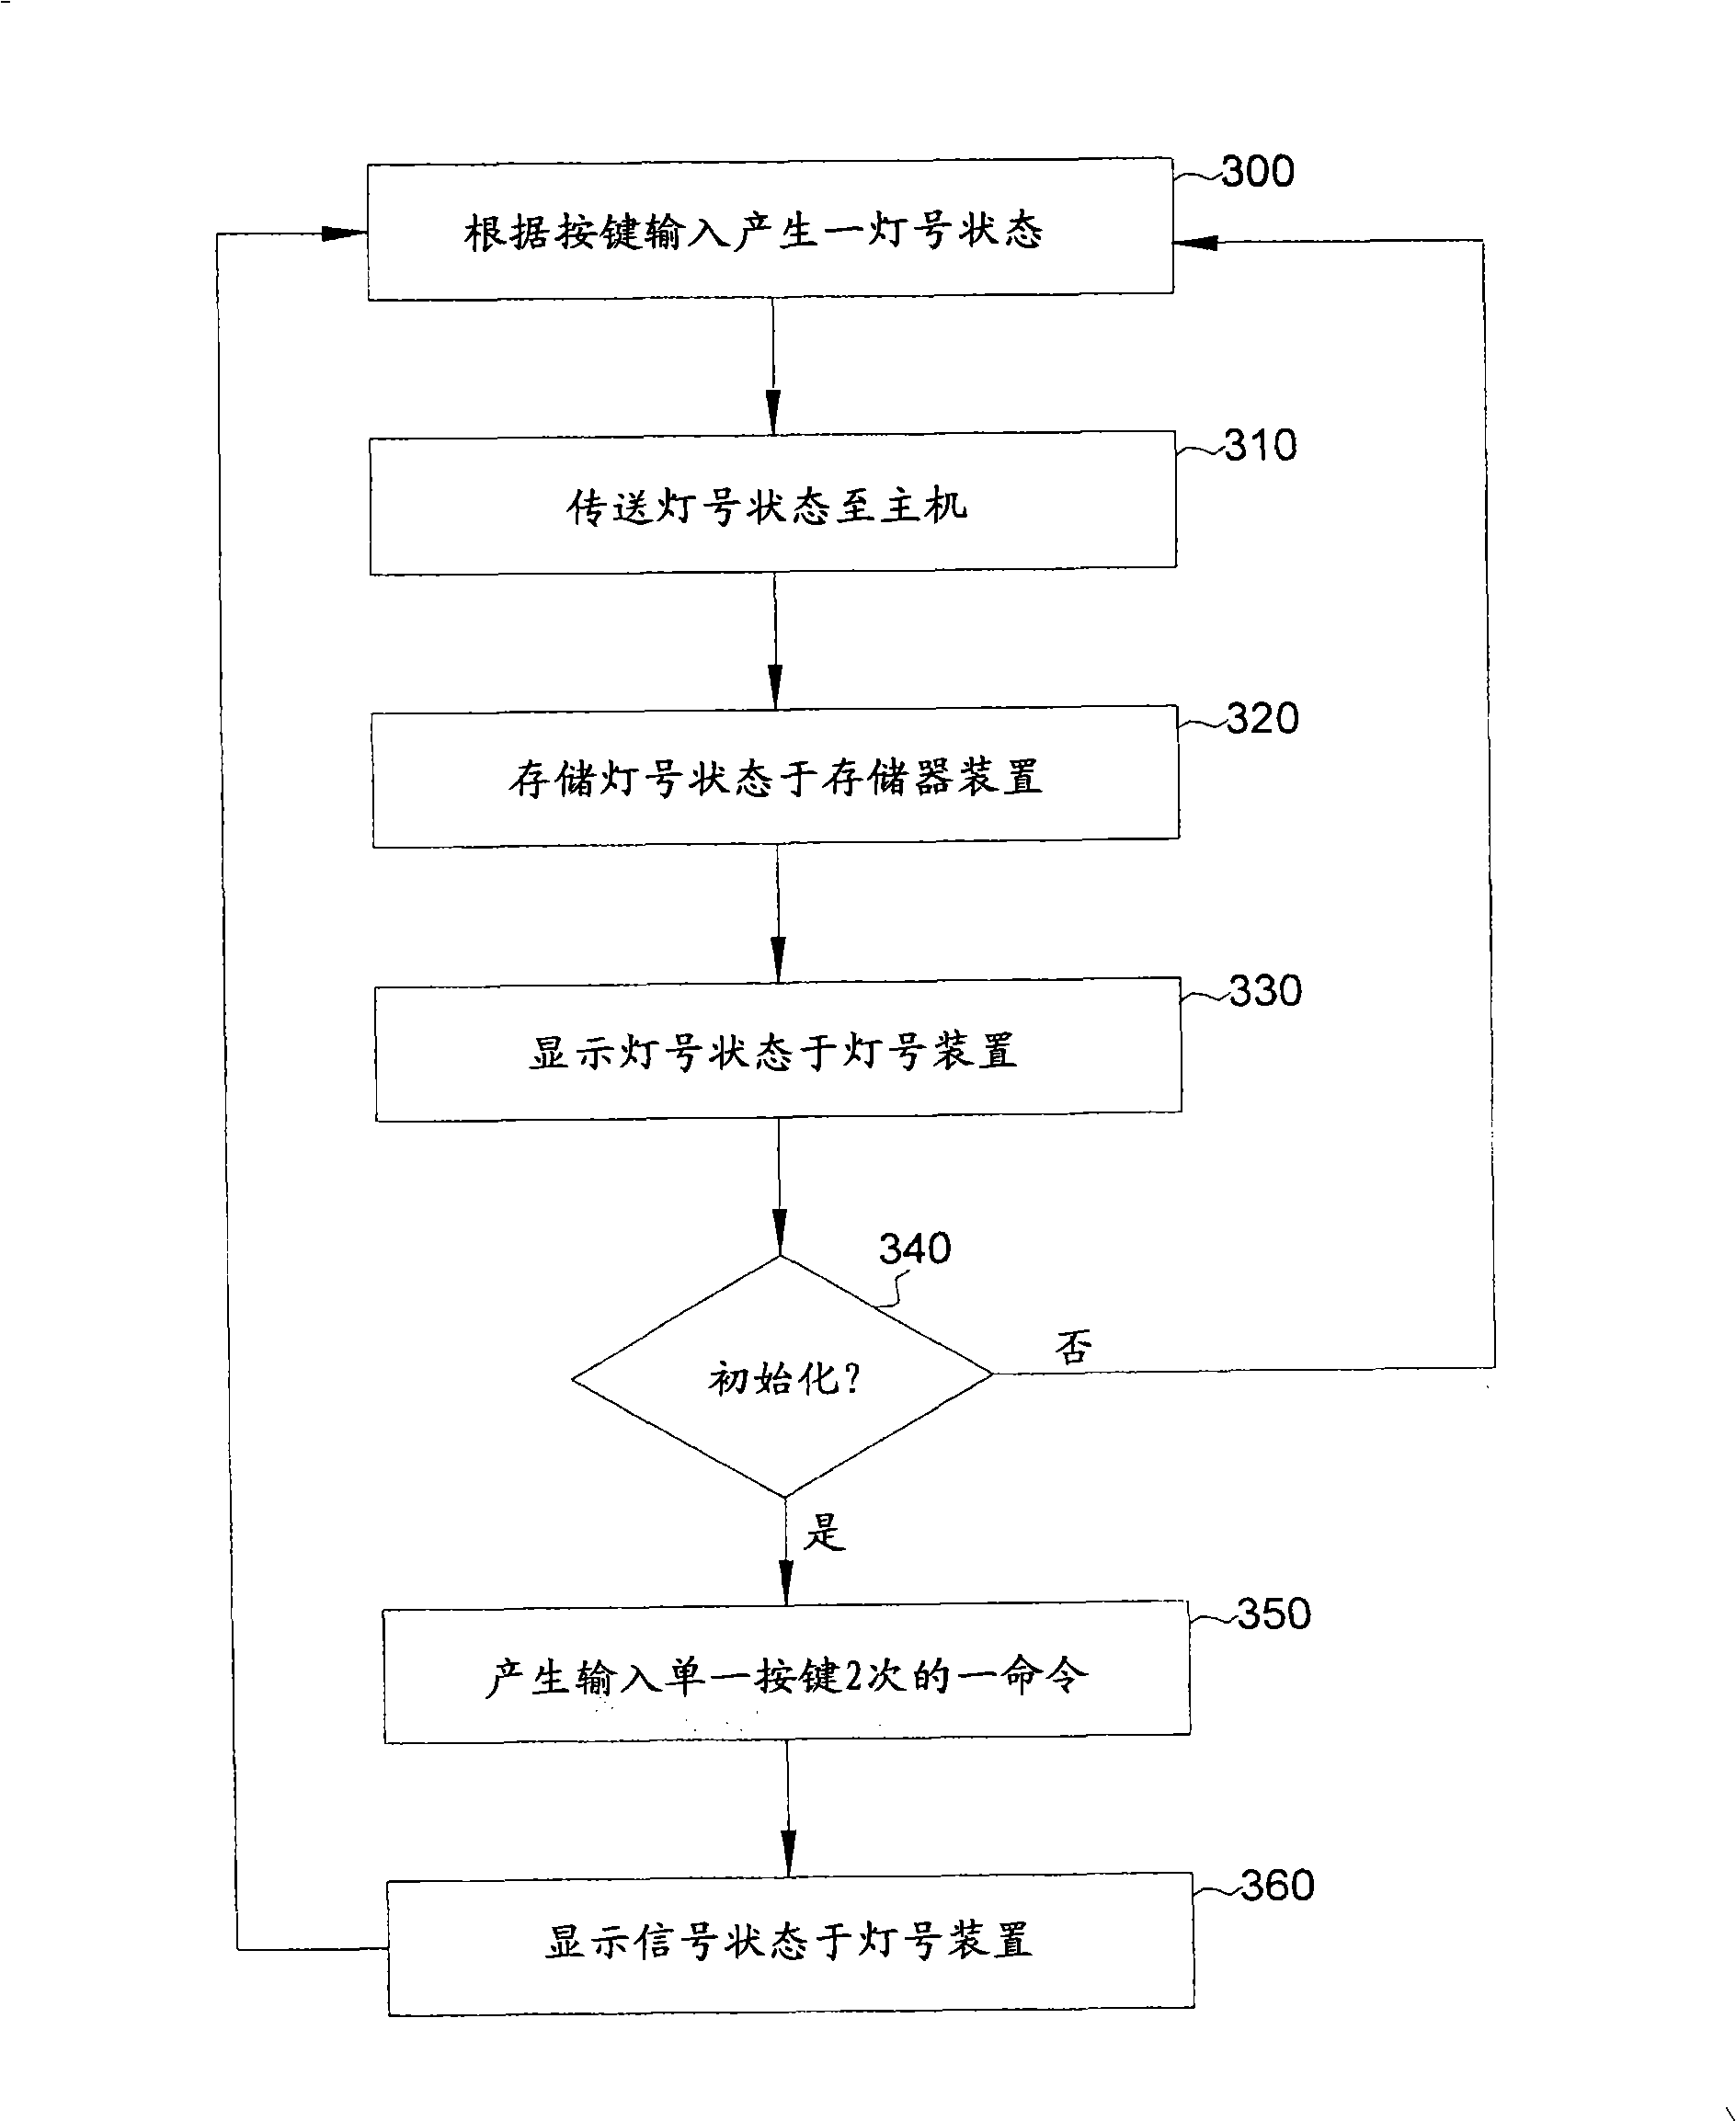 Keyboard synchronizing with host and the method